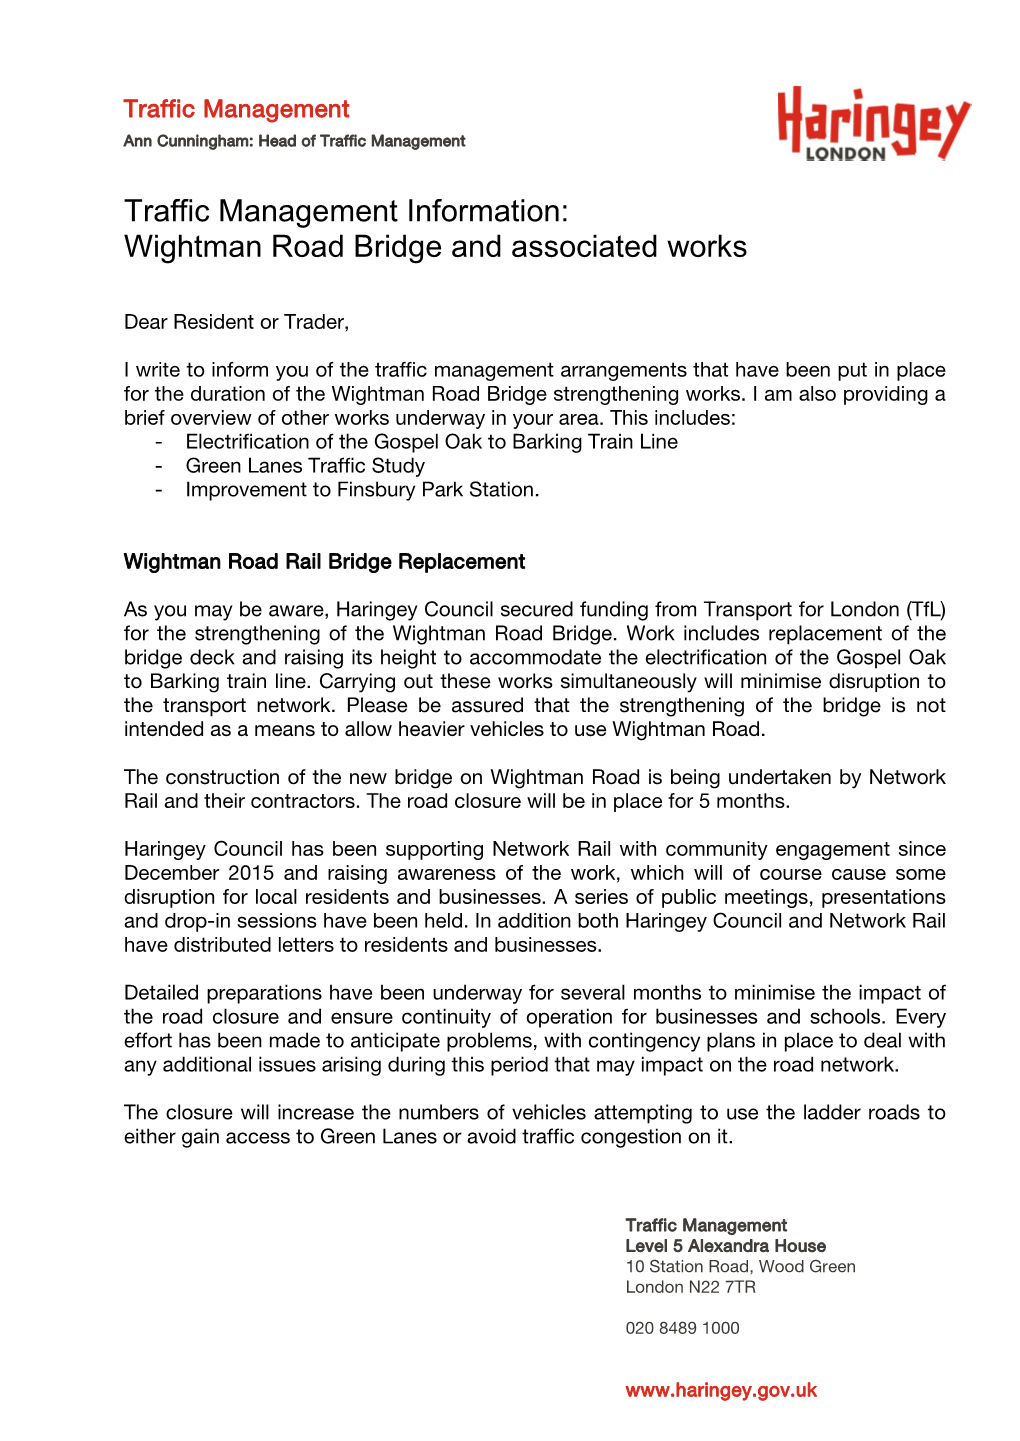 Traffic Management Information: Wightman Road Bridge and Associated Works